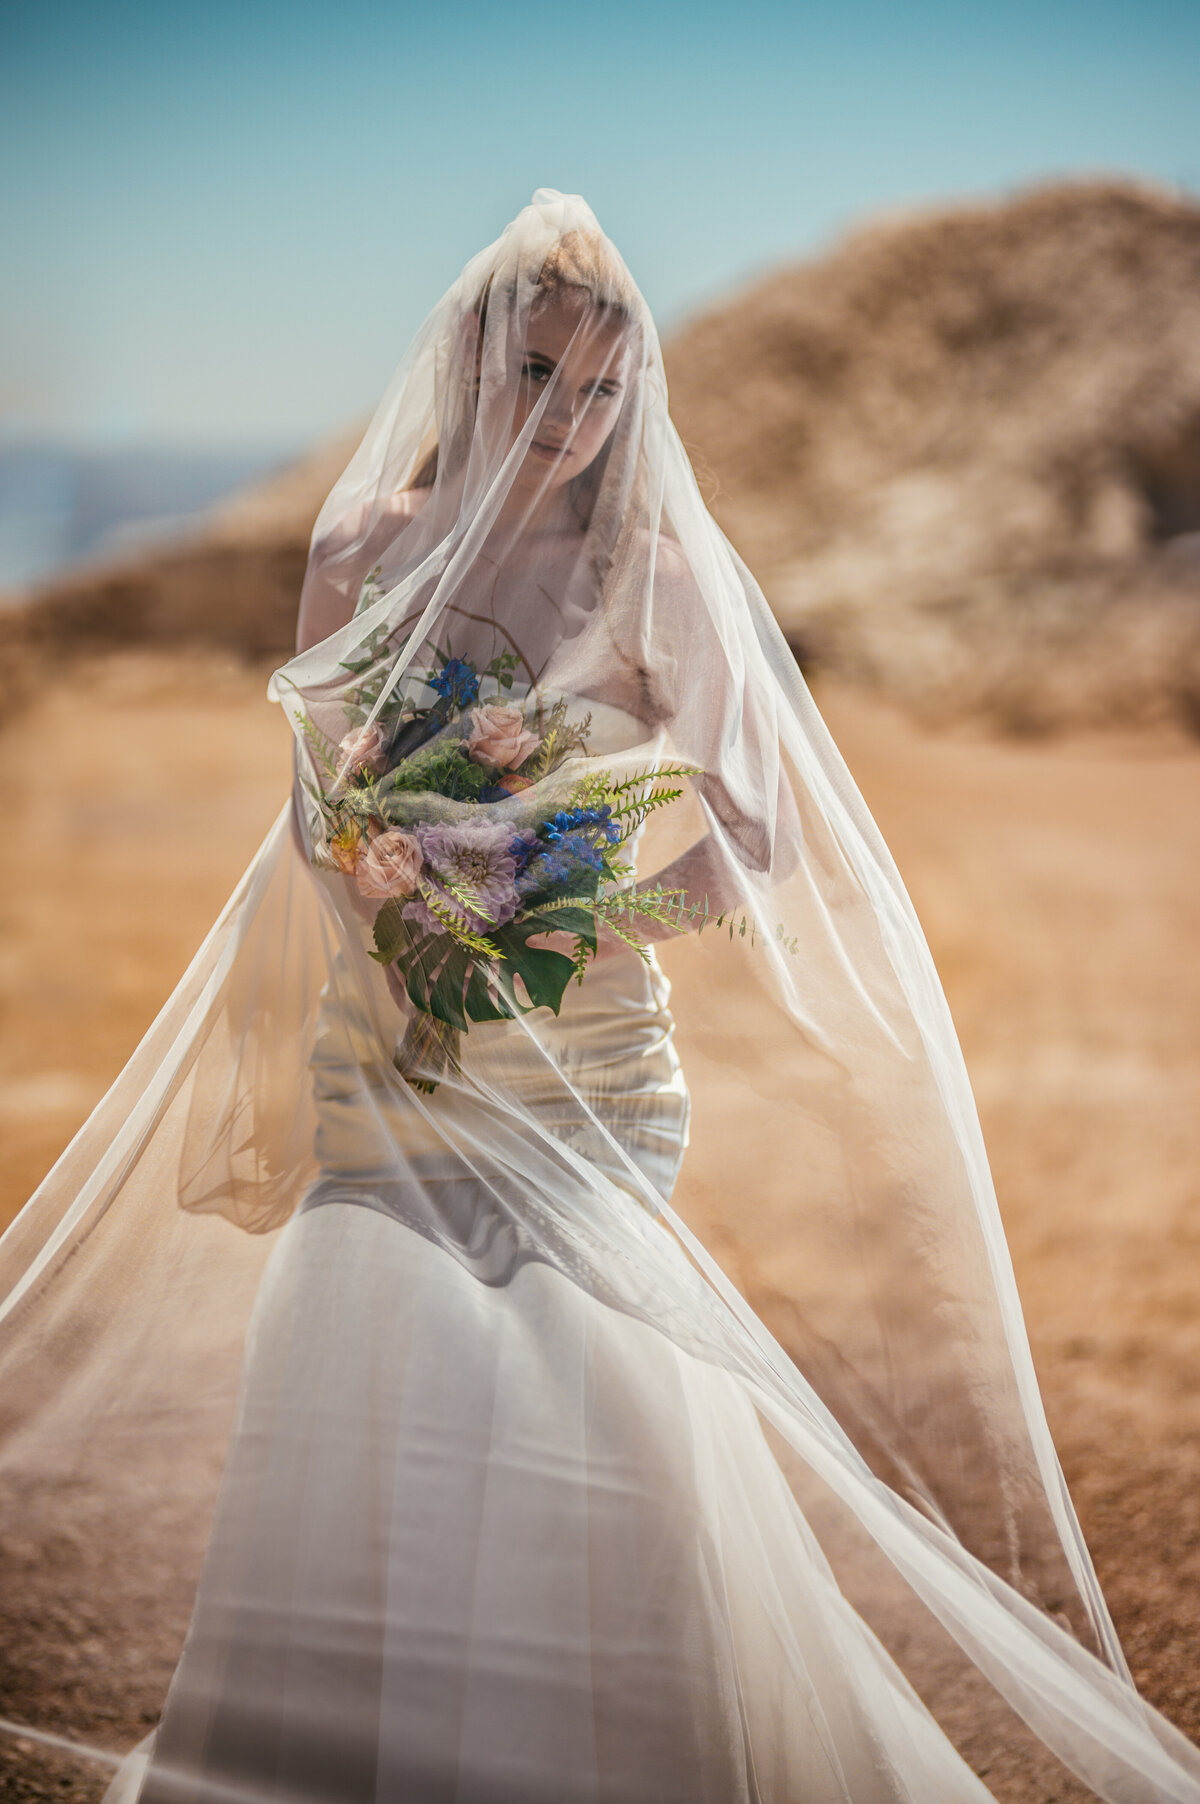 Bridal portrait in desert wrapped in her cathedral length veil holding flowers by michelle with pink purple and blue flowers and  palm leaves blue sky noon wedding ELDORADO CANYON MINE TOURS nelsons ghost town weddings nelsons landing bride in sleeveless gown and cathedral veil  groom in black tux armani  las vegas elopements las vegas wedding photography las vegas wedding photographers mk delacy photography